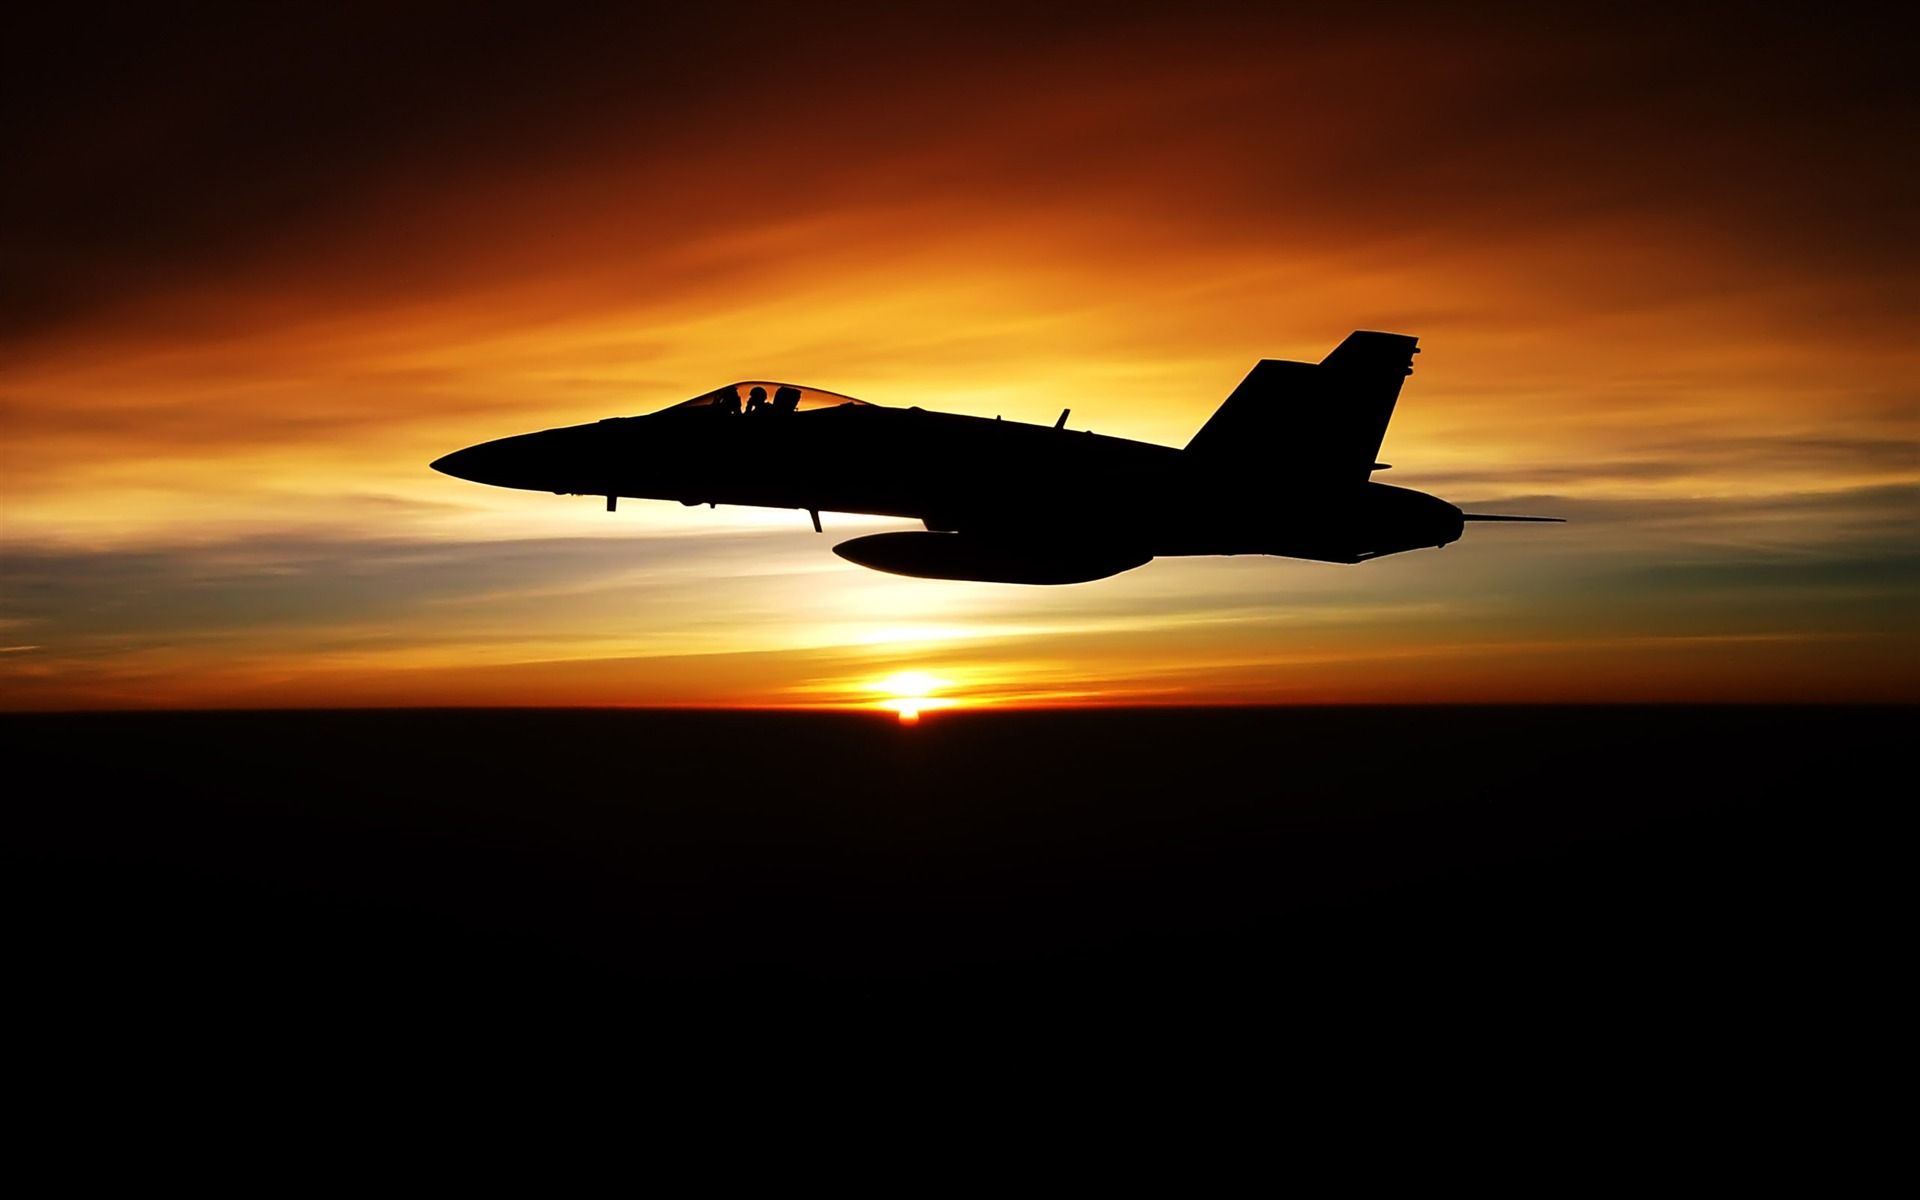 US Air Force Desktop Wallpaper, US Air Force Image, New Background